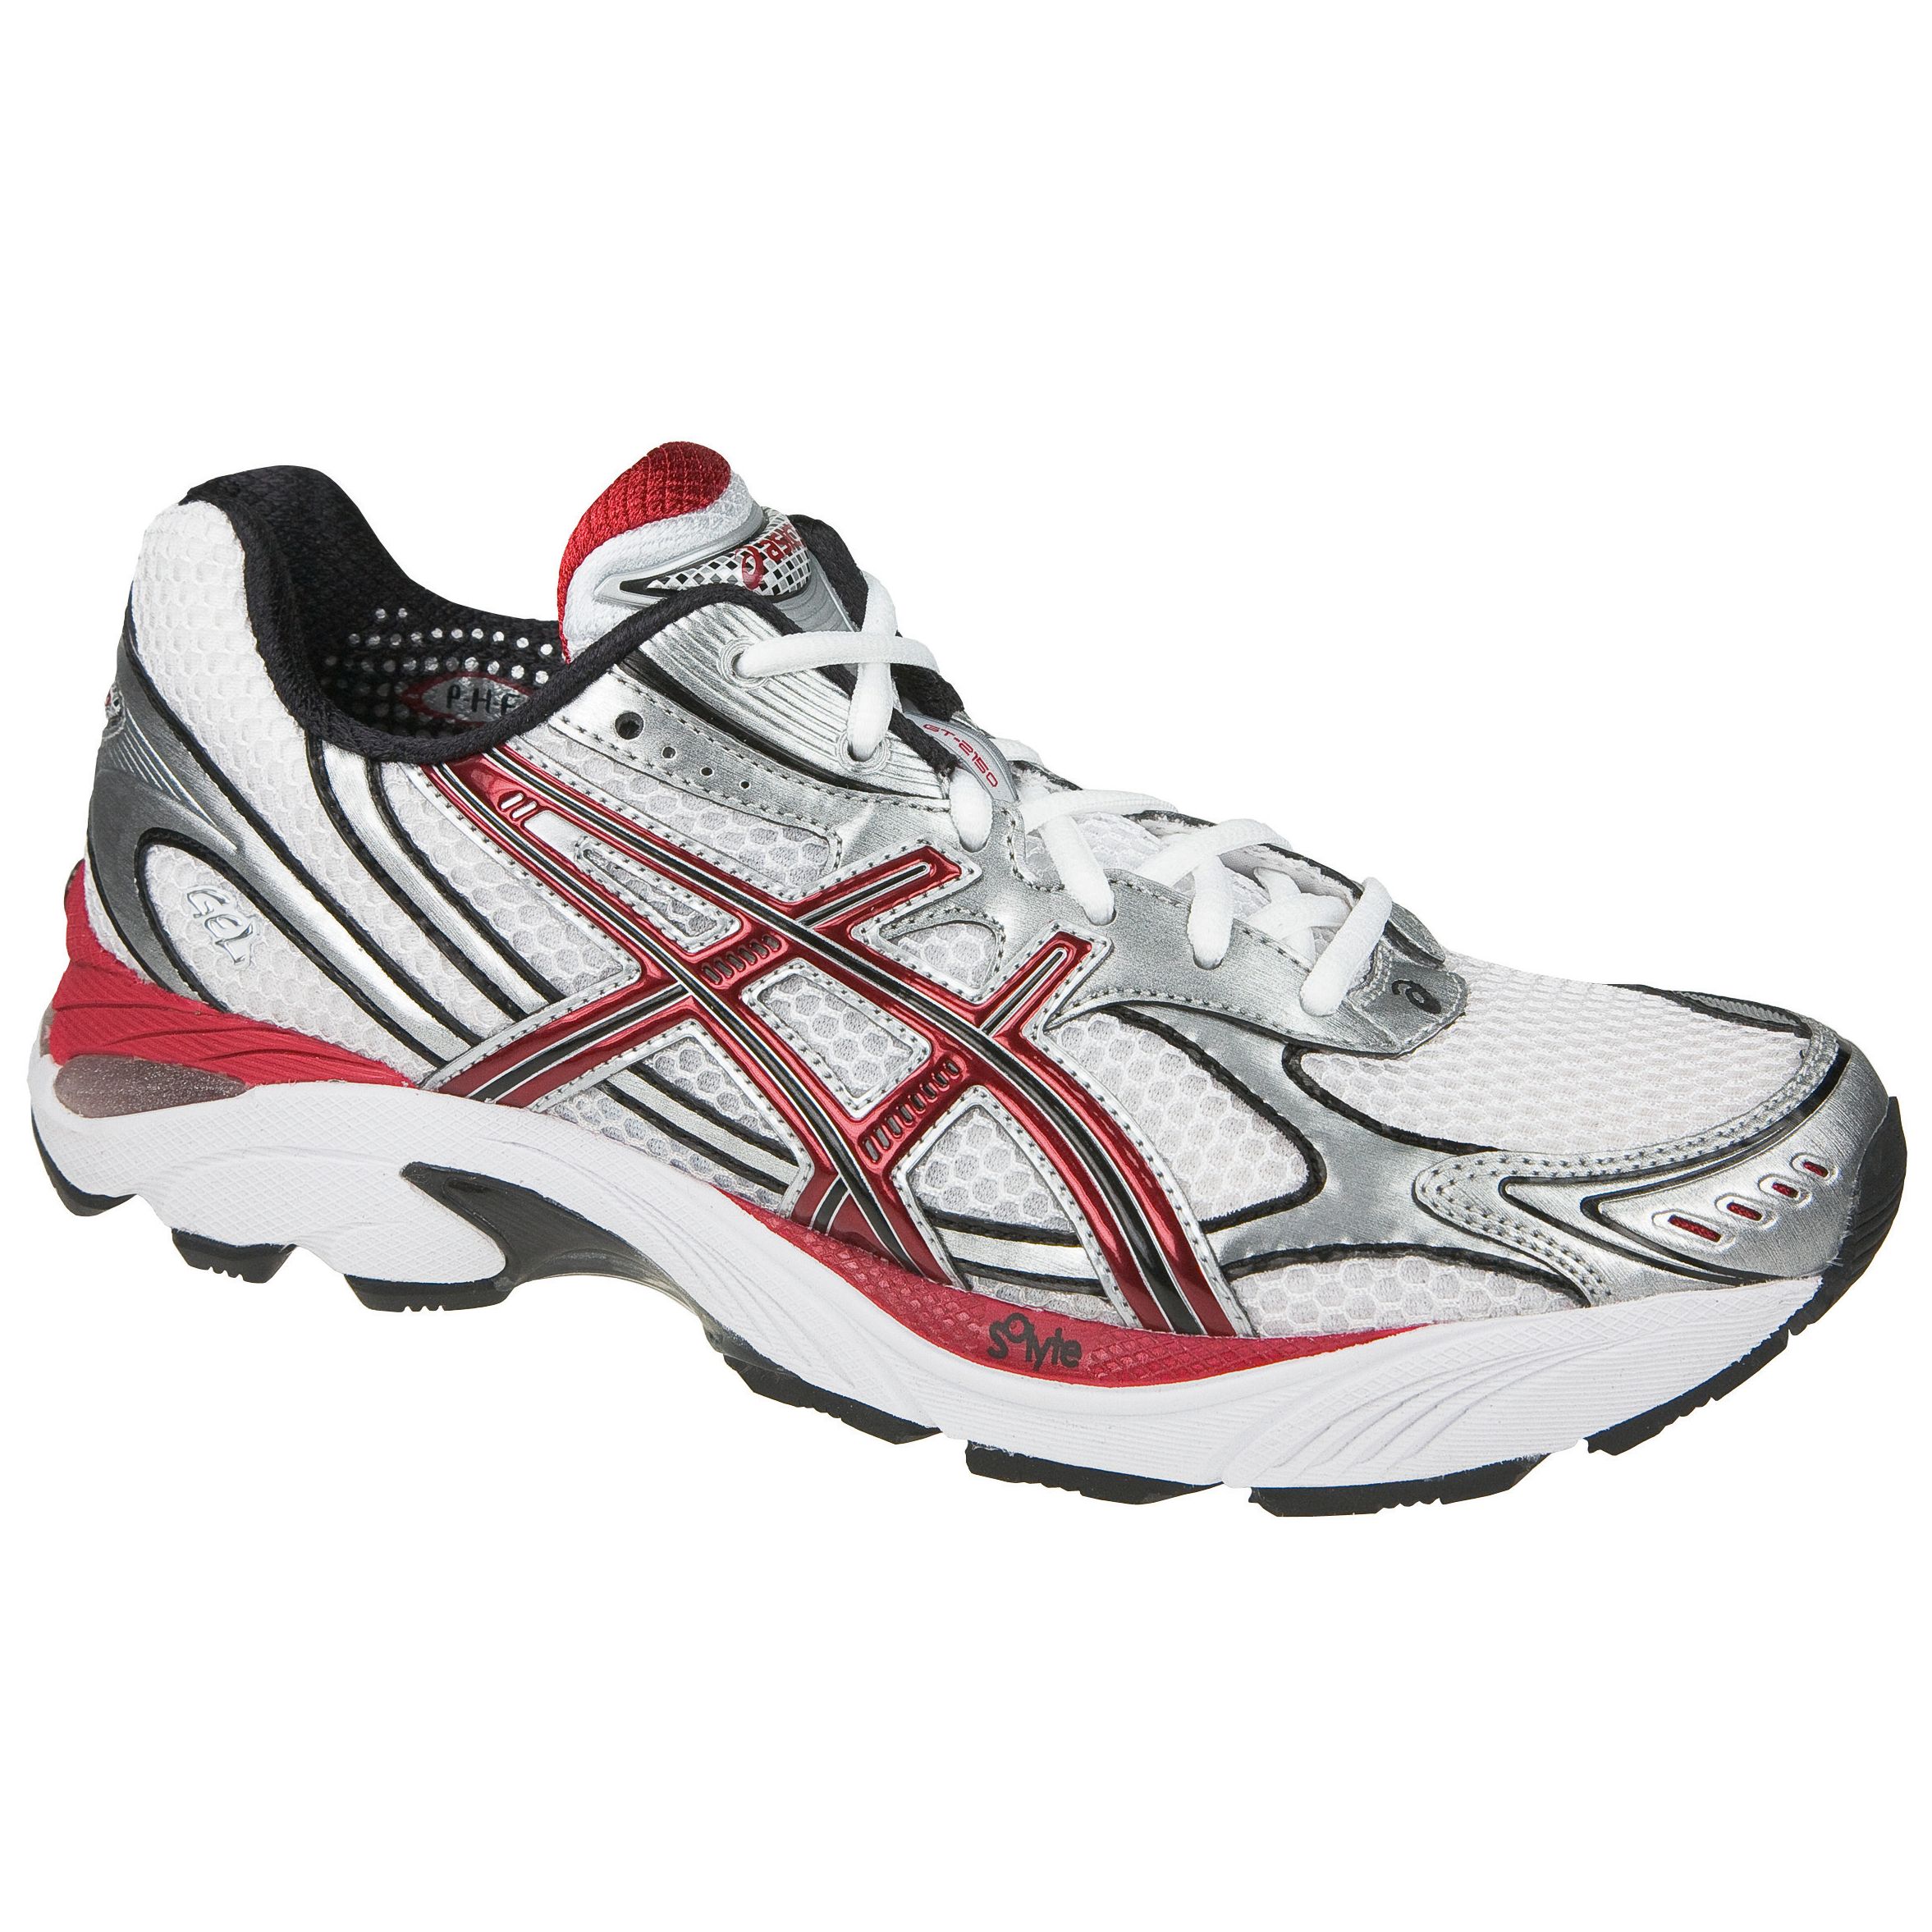 Asics GT2150 Running Shoes, White/red, 11